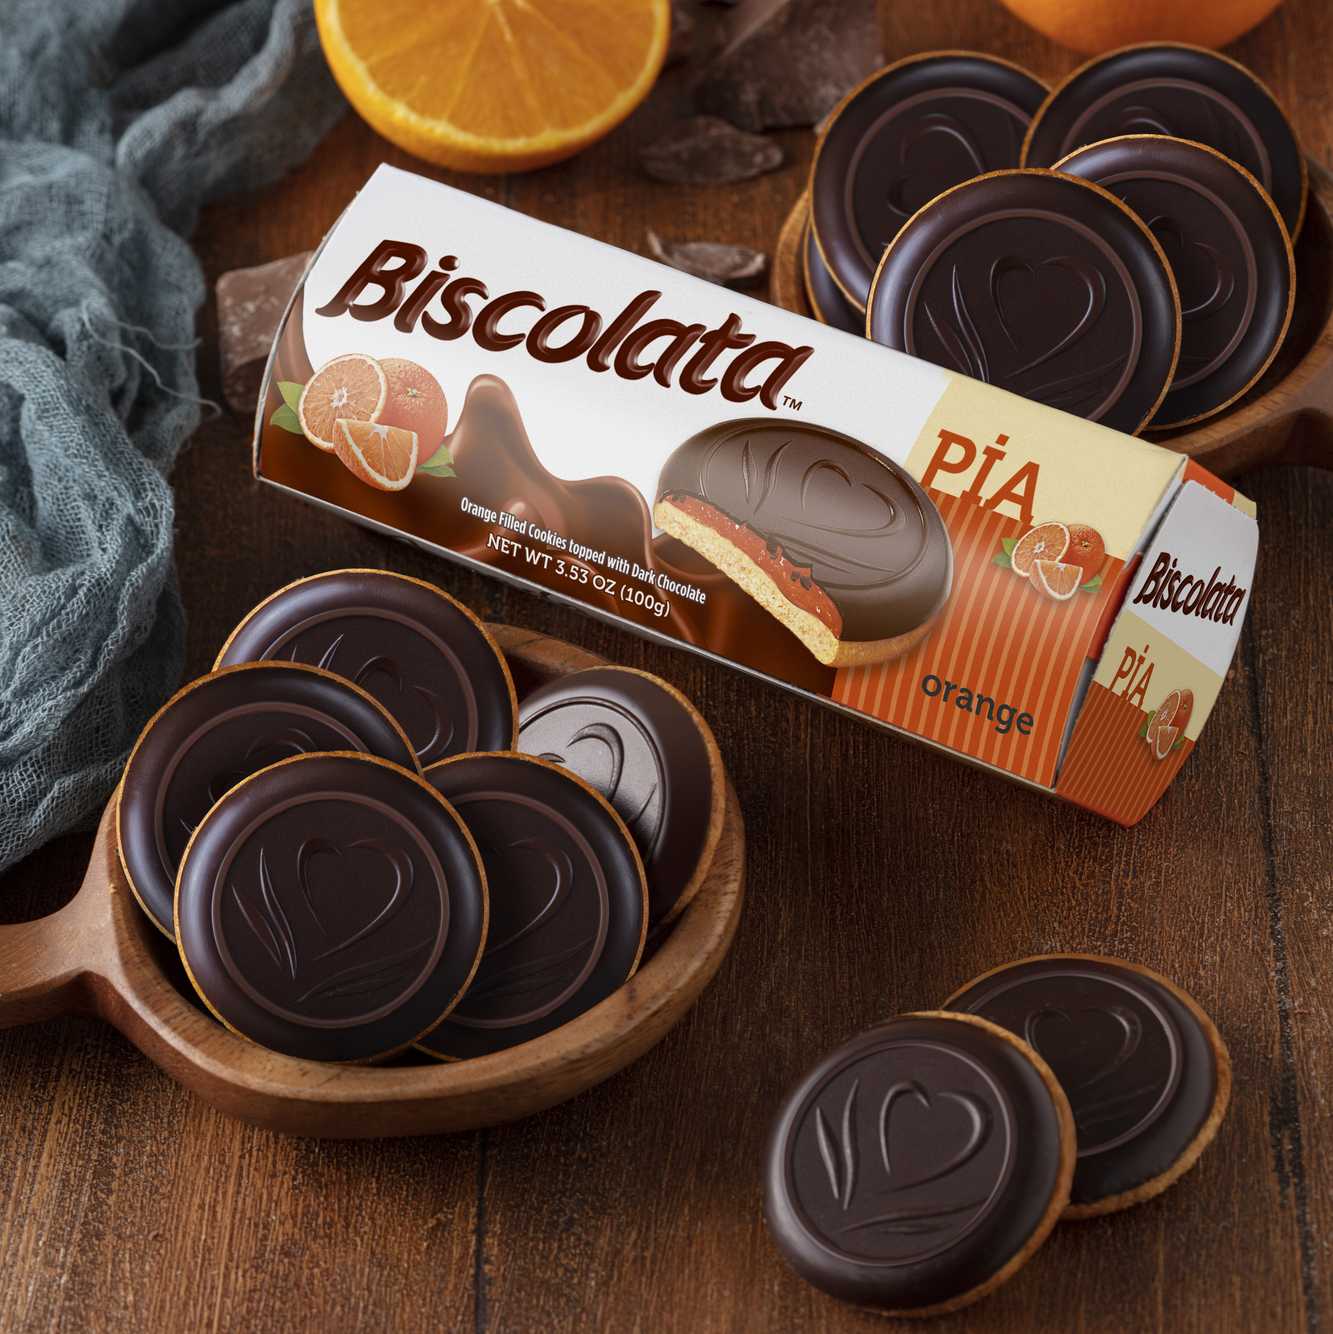 Biscolata chocolate sales on Amazon are on the rise as more and more people turn to chocolate for stress relief and pleasure during the pandemic.